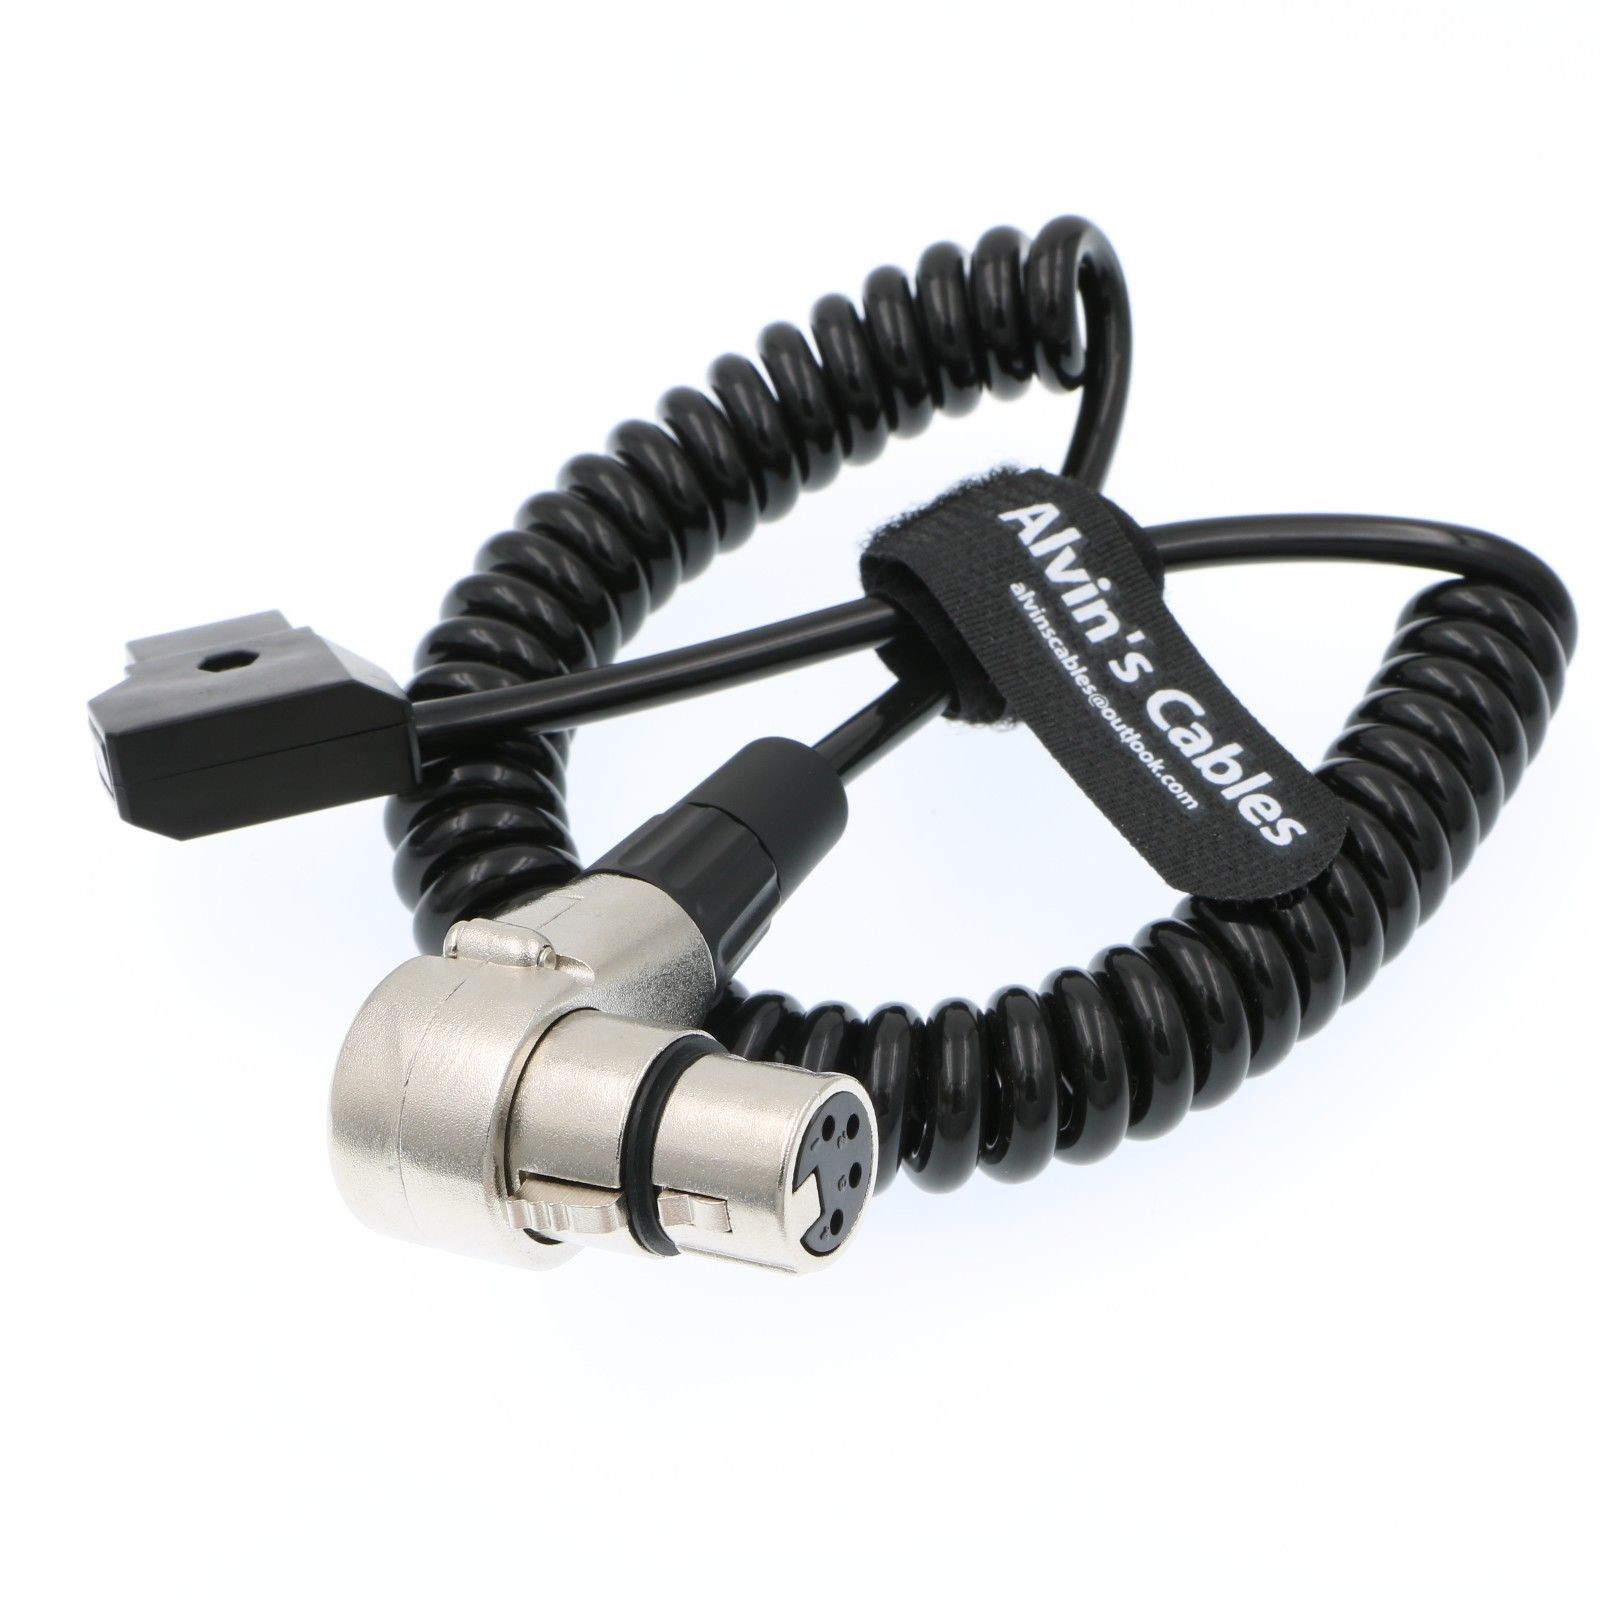 ARRI ALEXA Camera cable Right angle 90 Degree XLR 4 pin female to D-tap power spring cable for Supply Battery Adapter 